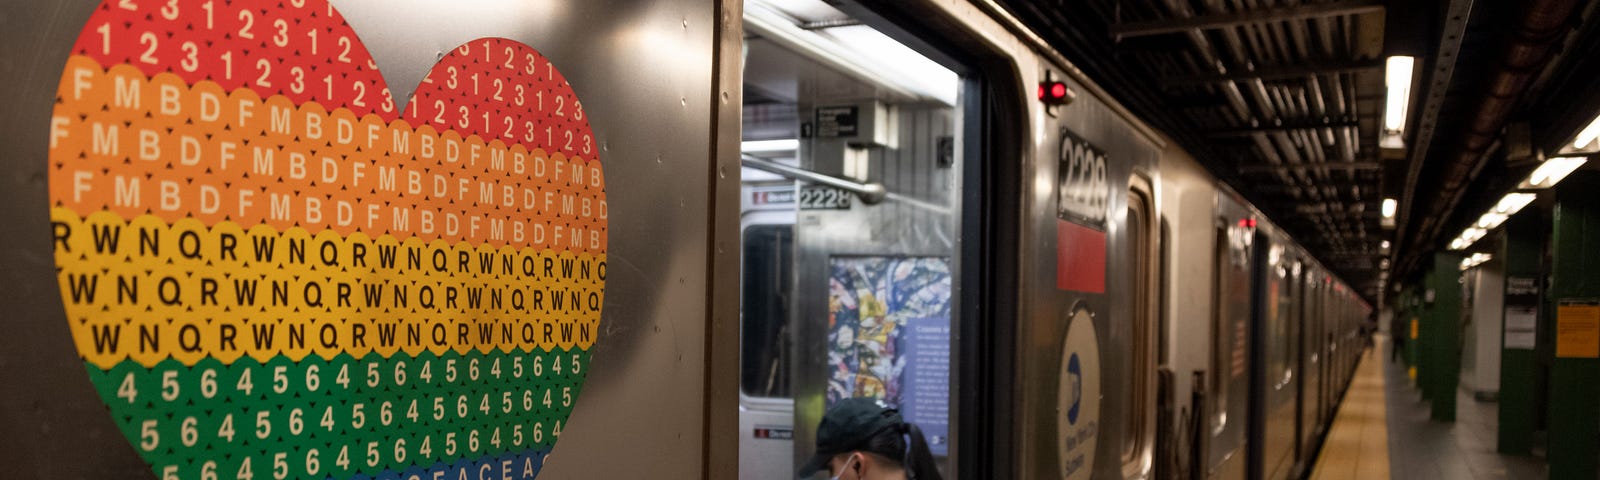 A pride colored heart is seen on a subway car near a person wearing a mask as the city moves into Phase 2 of re-opening following restrictions imposed to curb the coronavirus pandemic on June 25, 2020 in New York City.